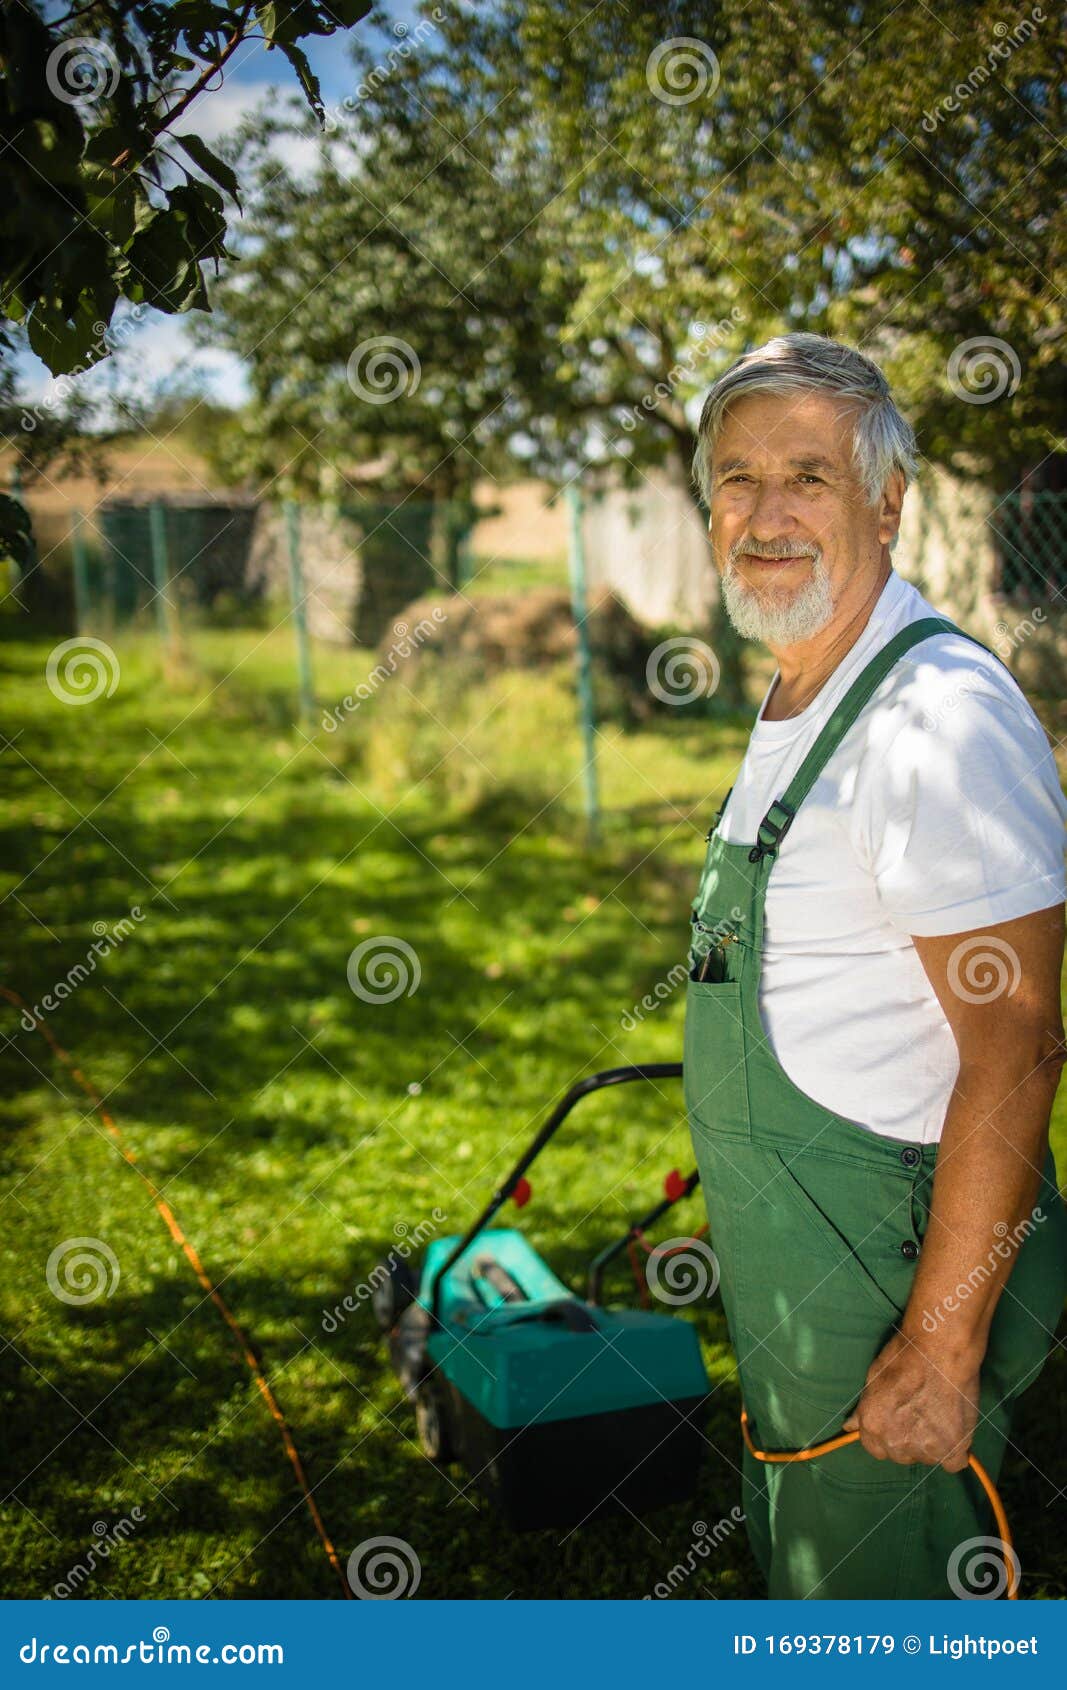 Senior Gardenr in His Permaculture Garden - Mowing the Lawn Stock Image ...